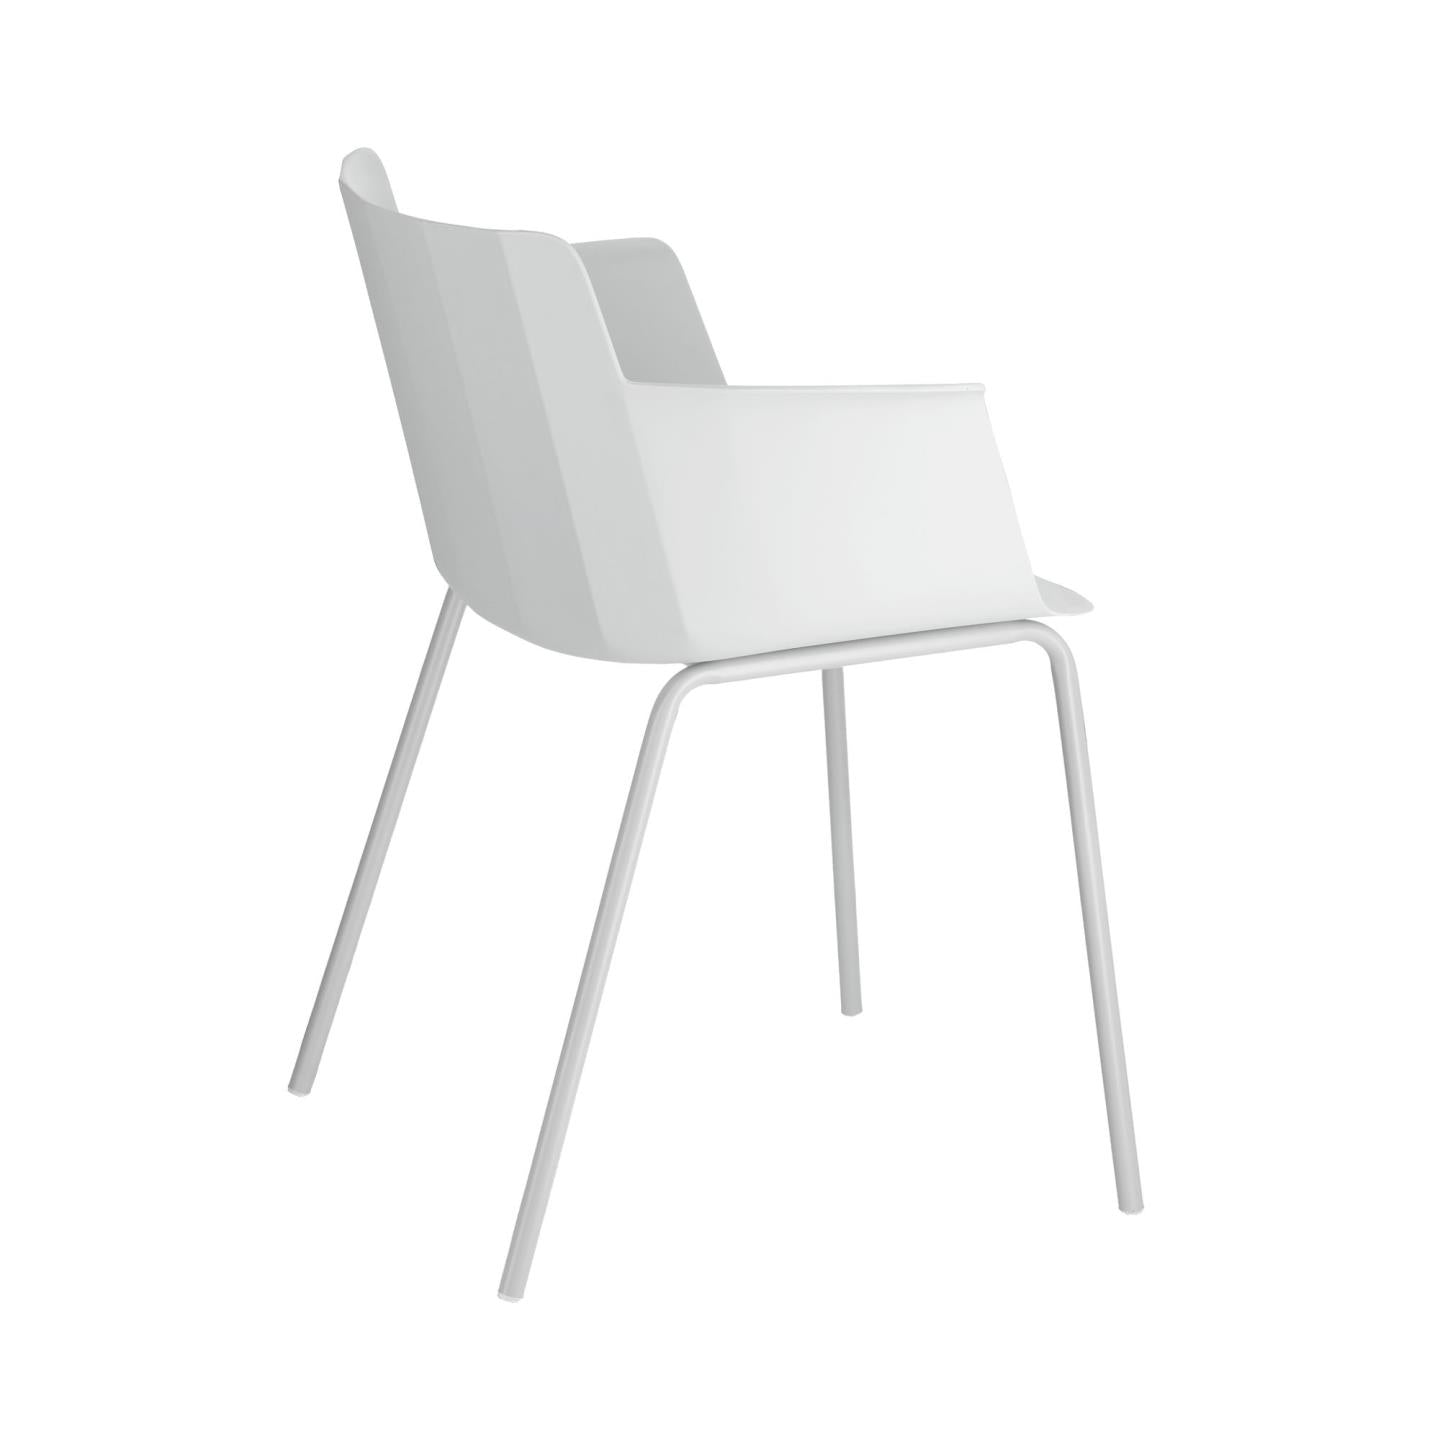 Hannia grey chair with arms